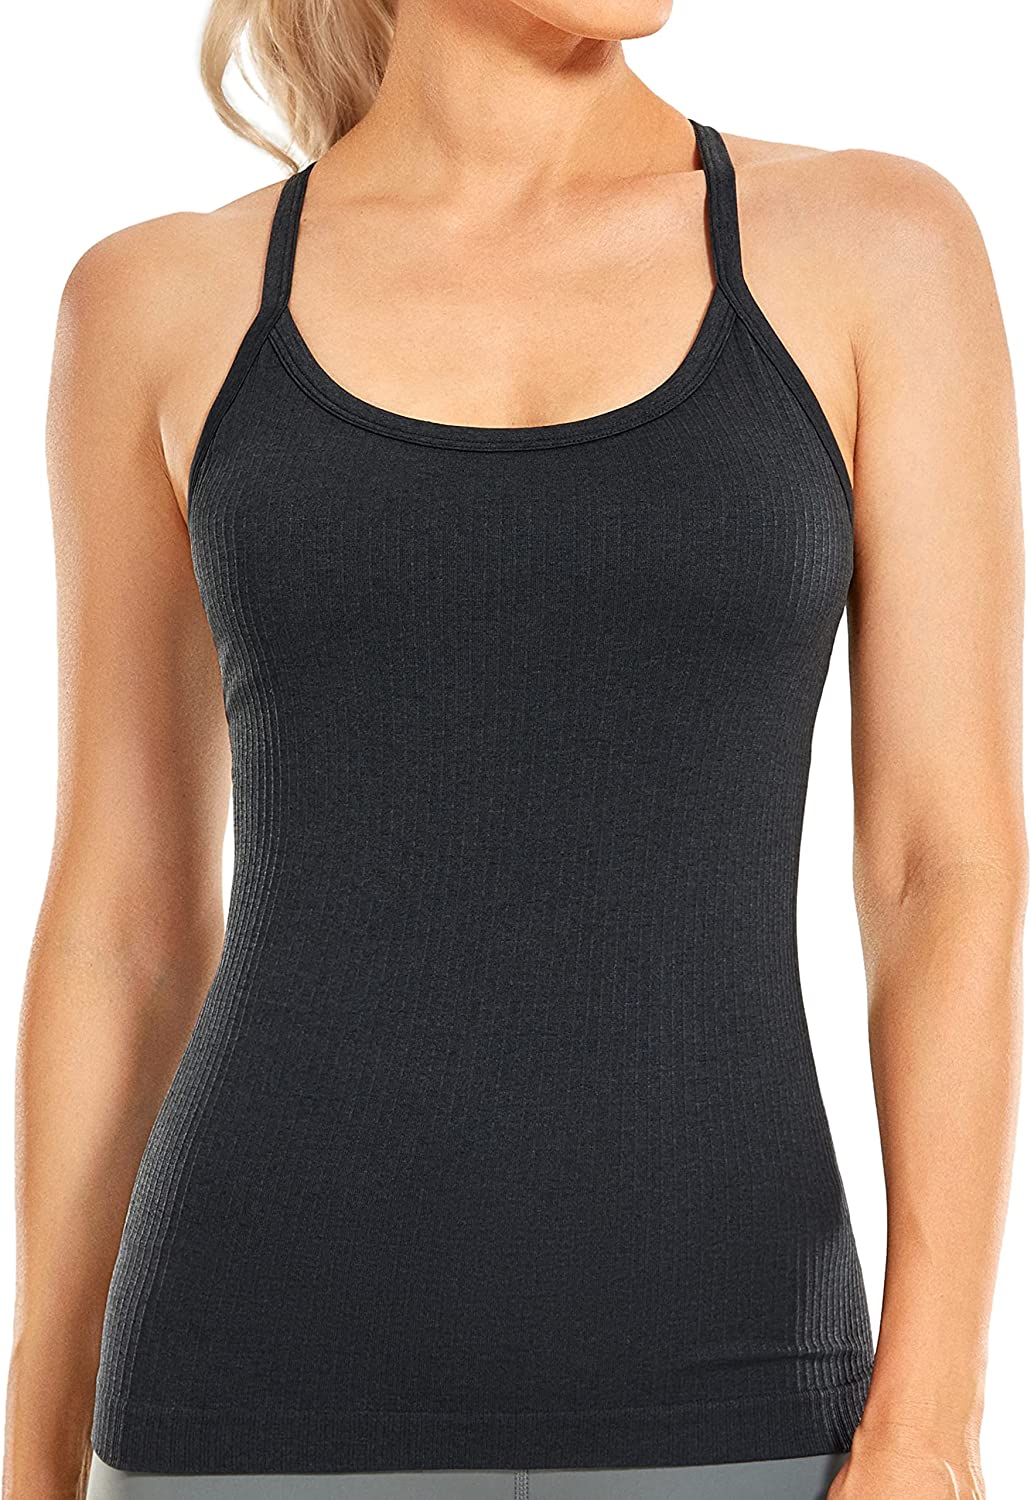 CRZ YOGA Seamless Workout Tank Tops For Women Racerback Athletic Camisole  Sports Shirts